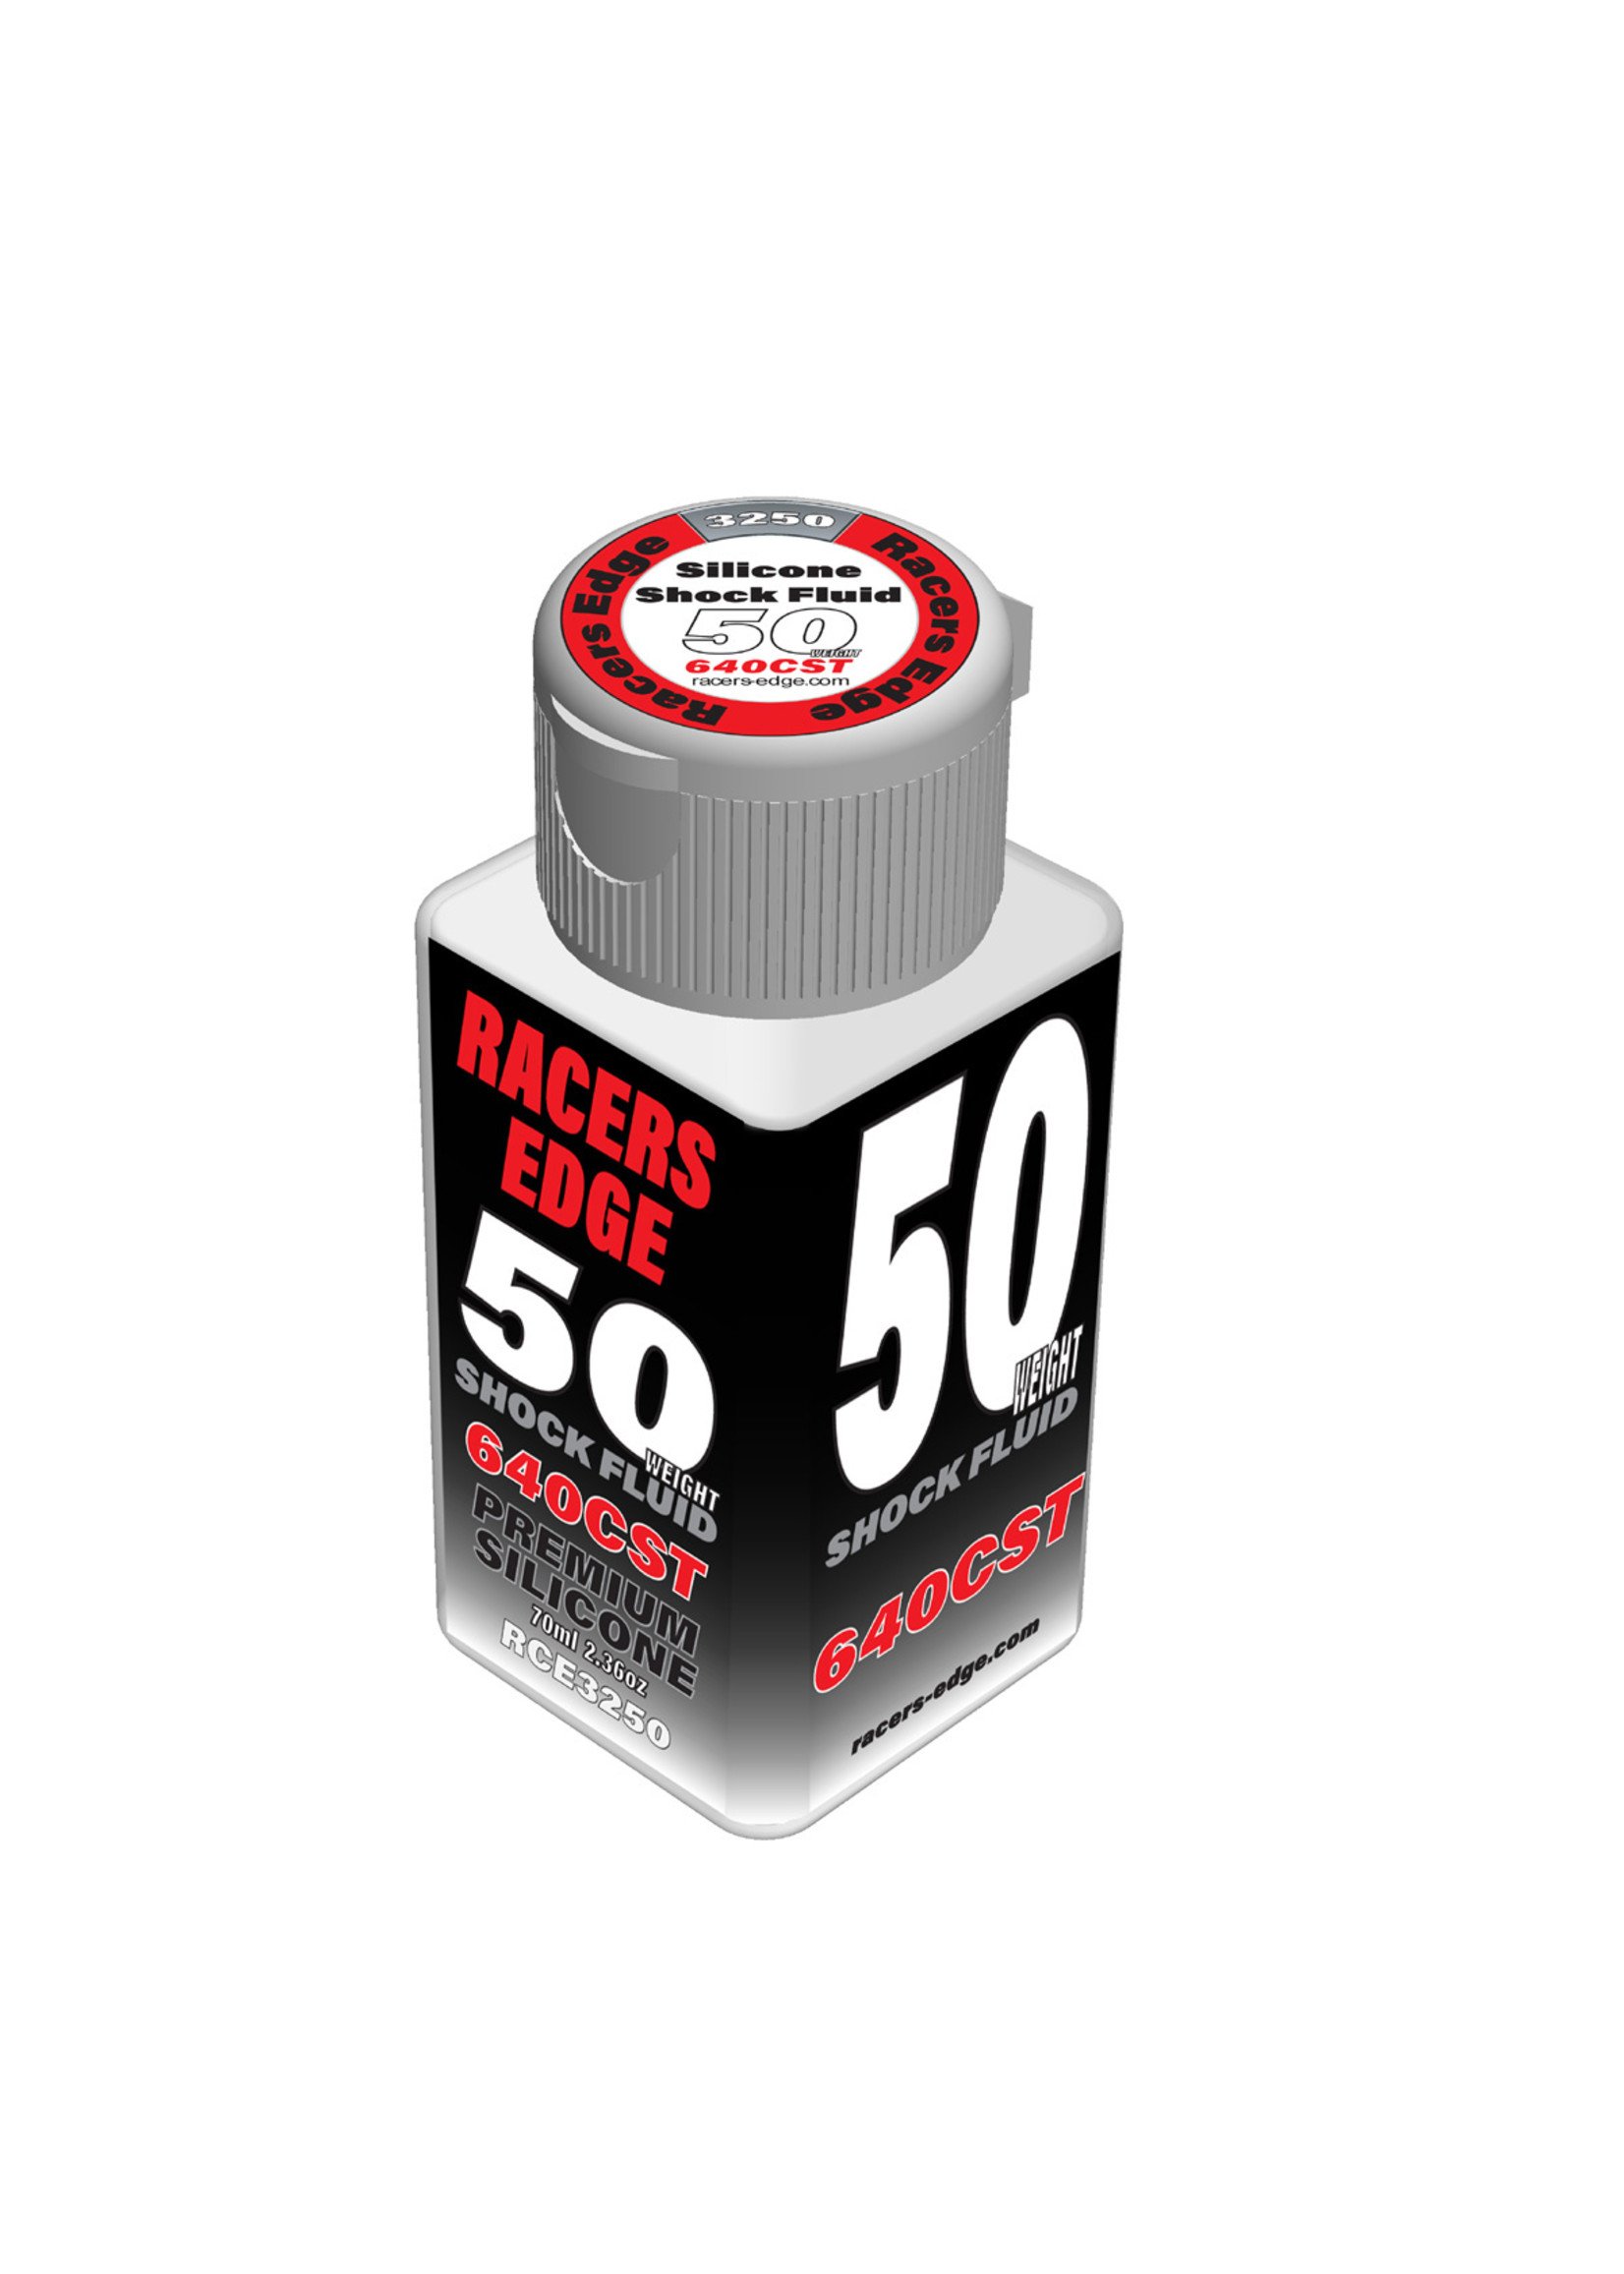 Racers Edge RCE3250 - 50 Weight, 640cSt, 70ml 2.36oz Pure Silicone Shock Oil